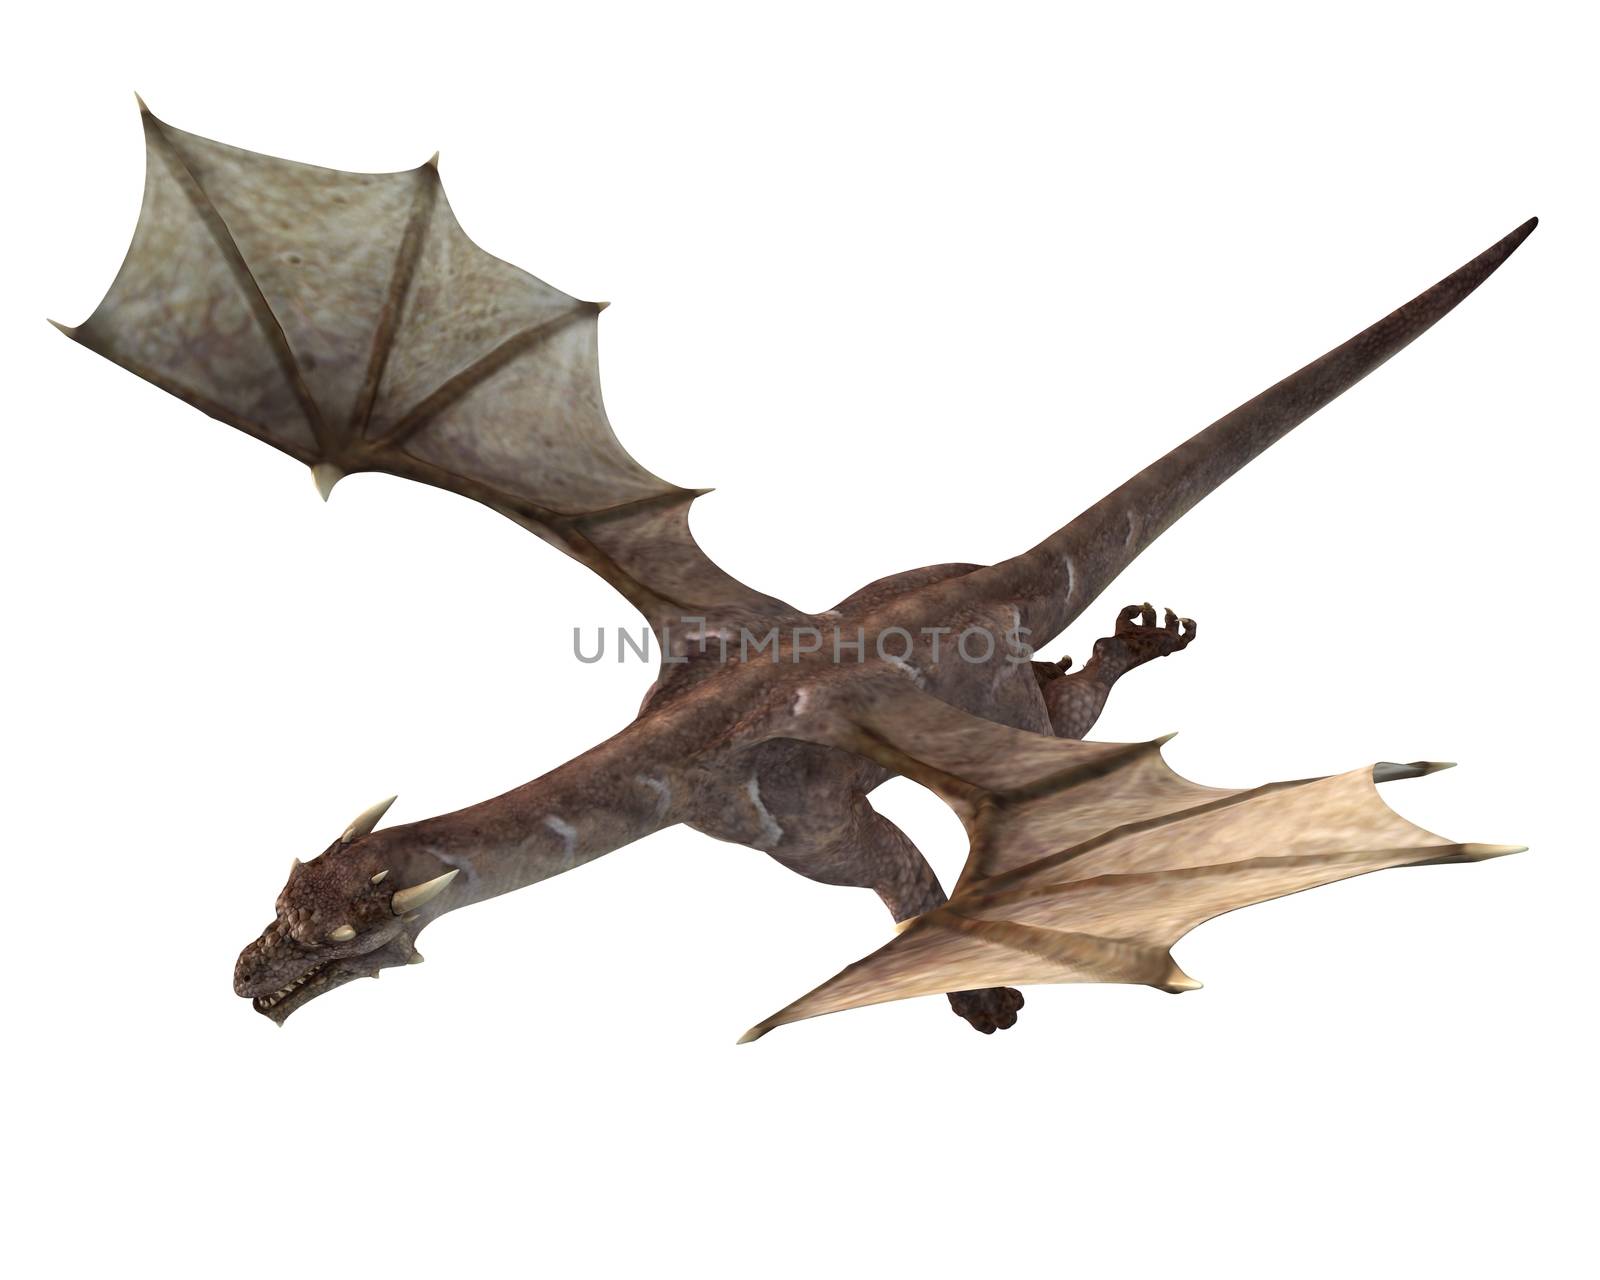 3D digital render of a soaring fantasy dragon isolated on white background